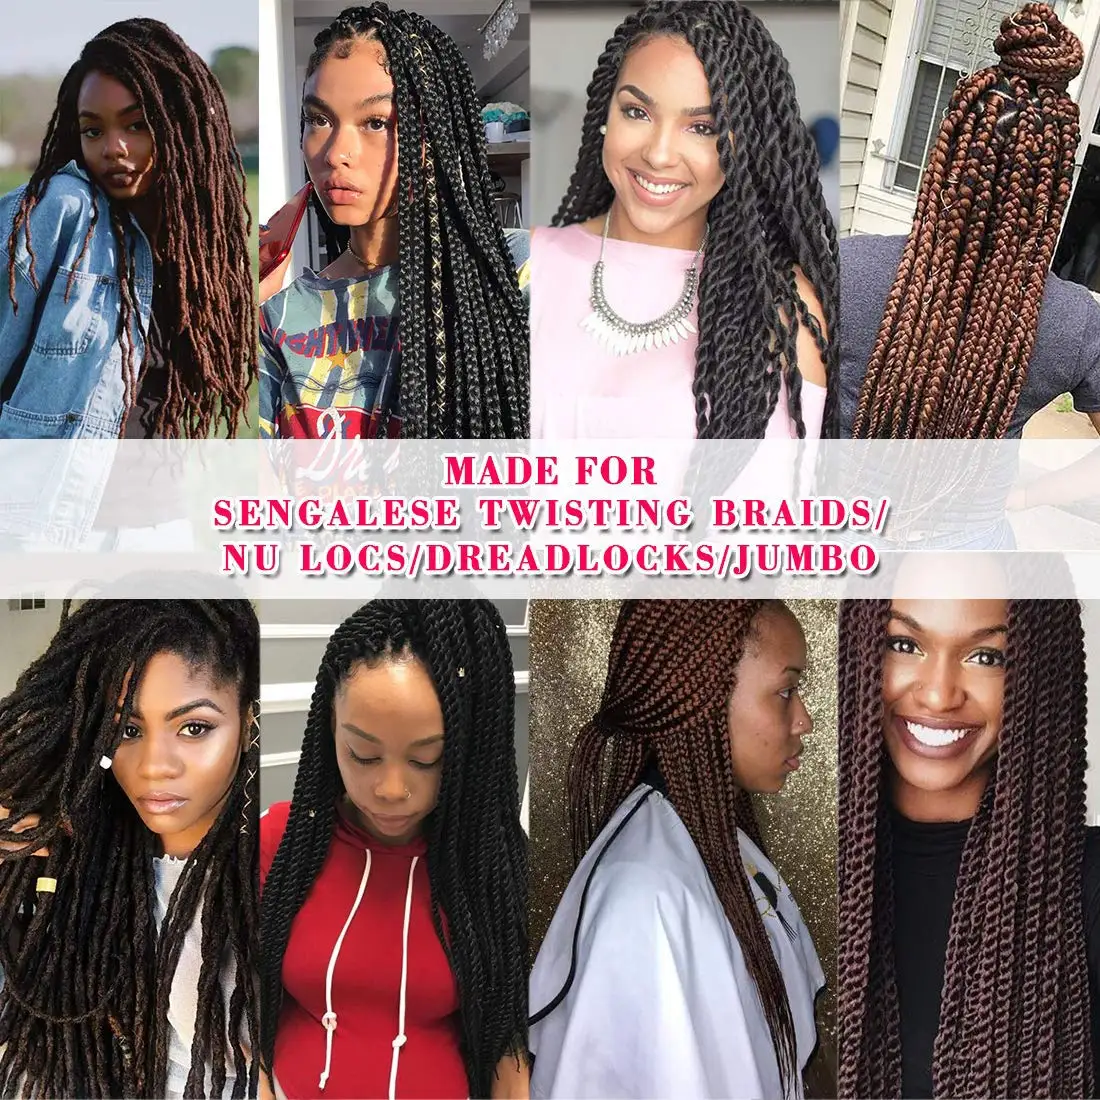 Premium Brazilian Virgin Human Hair Double 8 Corn Cute Braid Hairstyles  Black Toupee With Full Lace Topper For Black Women From Yuanhaibolacewig,  $87.44 | DHgate.Com